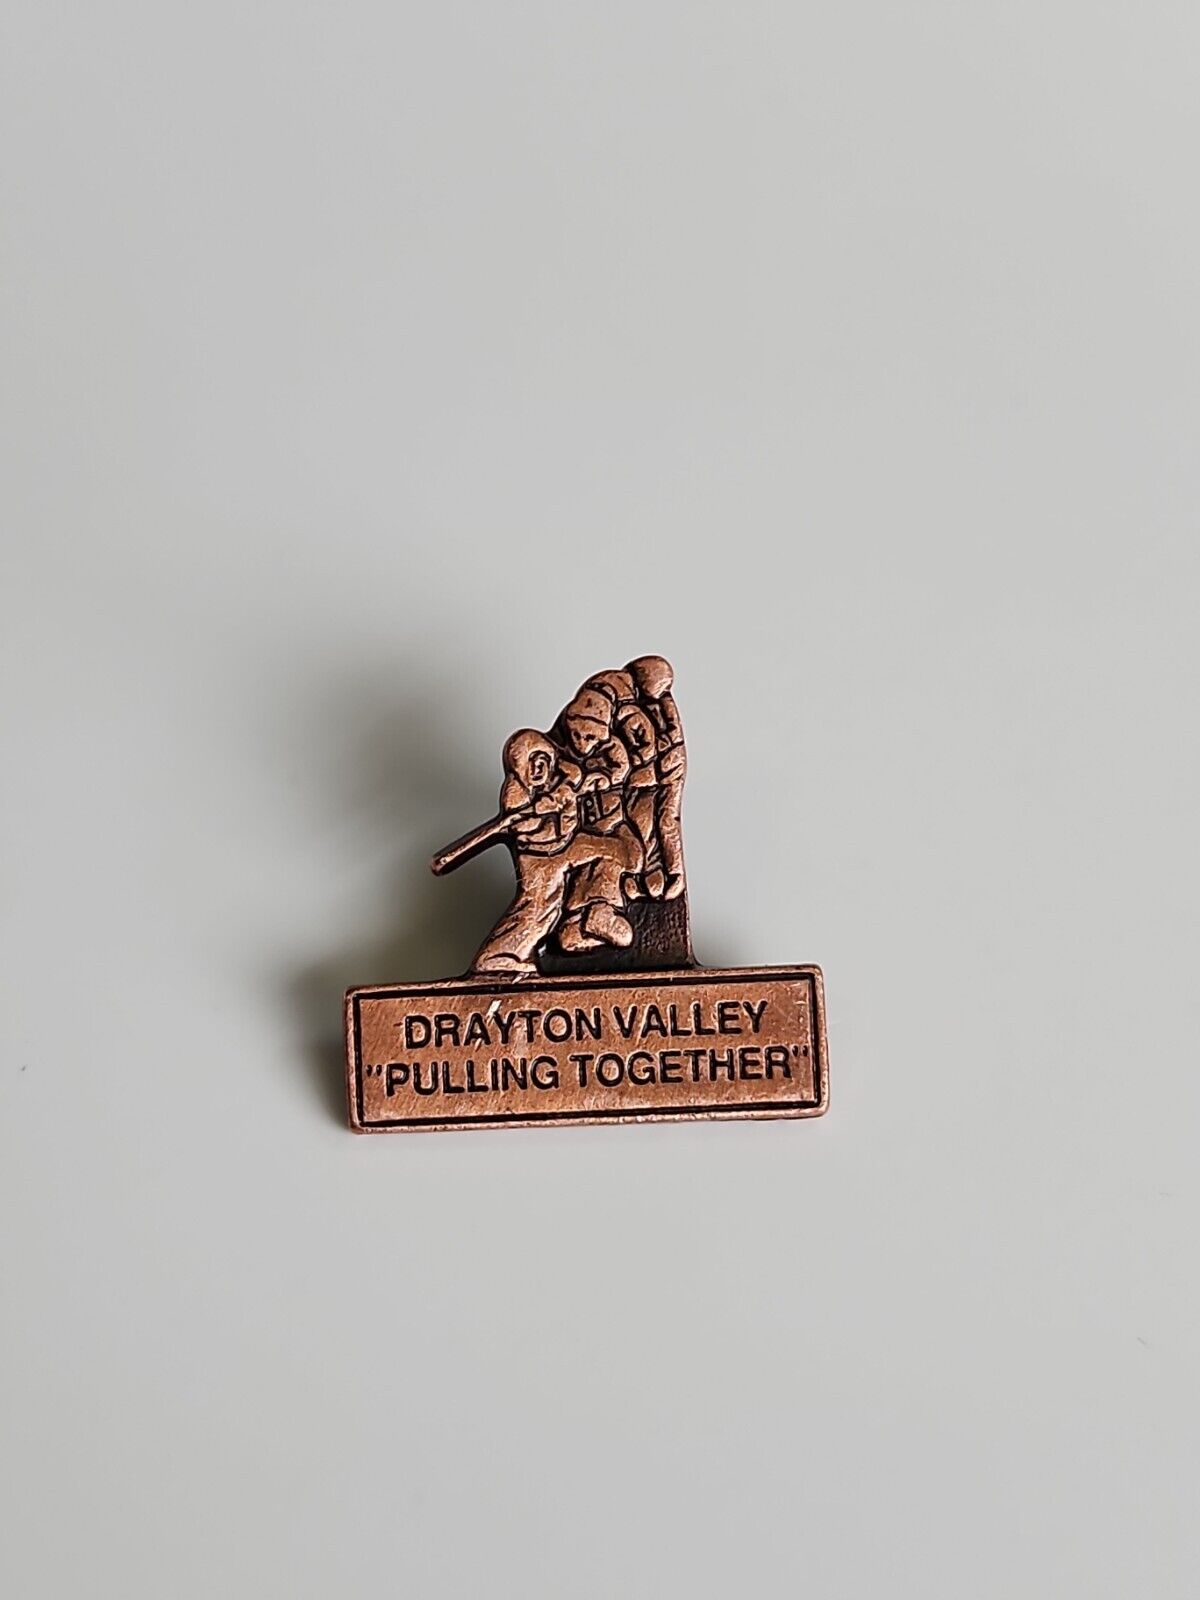 Drayton Valley Pulling Together Lapel Pin City in Alberta Canada